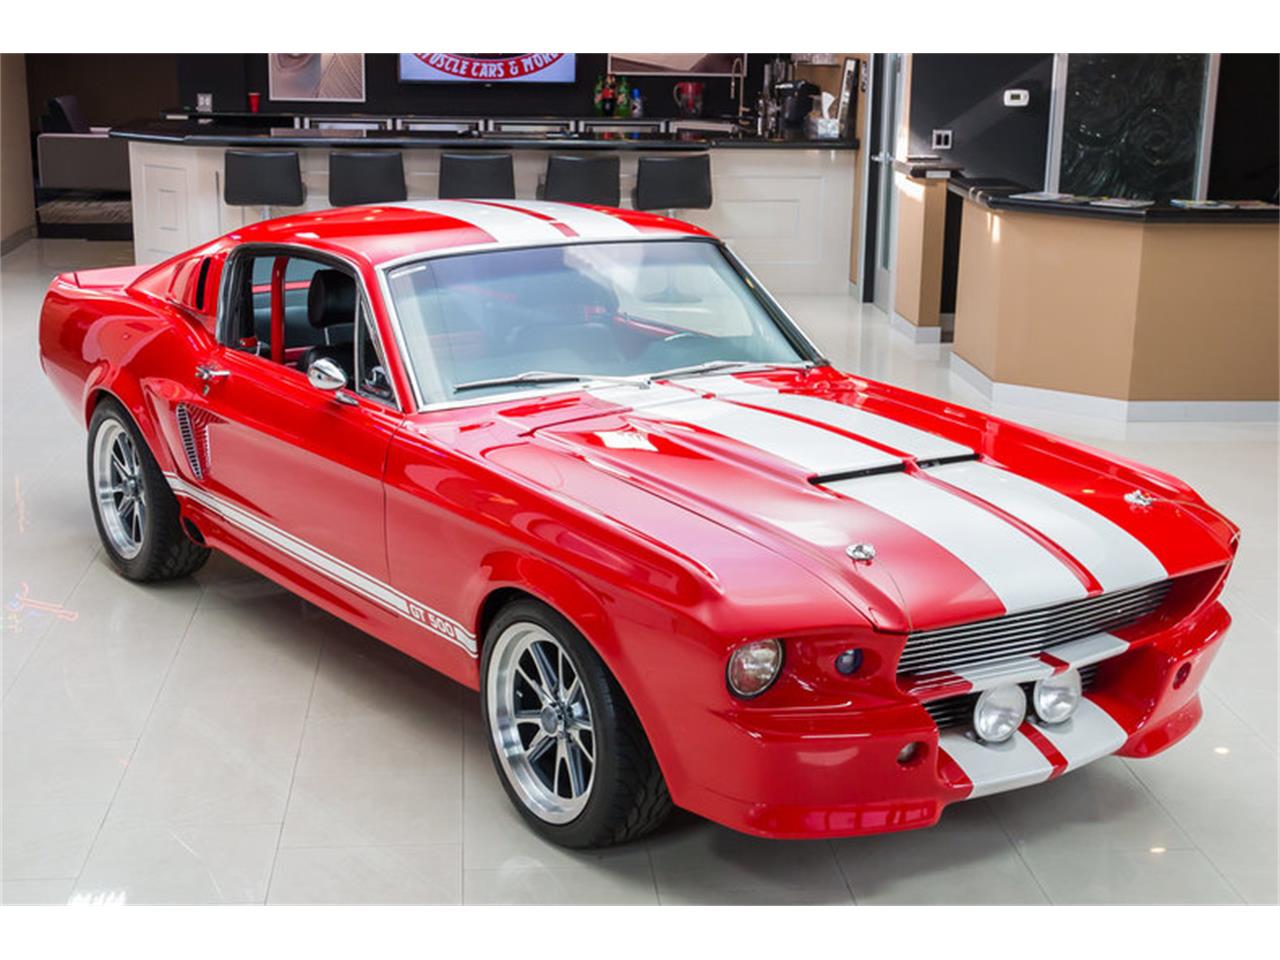 1967 Ford Mustang Fastback - Saleen Eleanor for Sale | ClassicCars.com ...